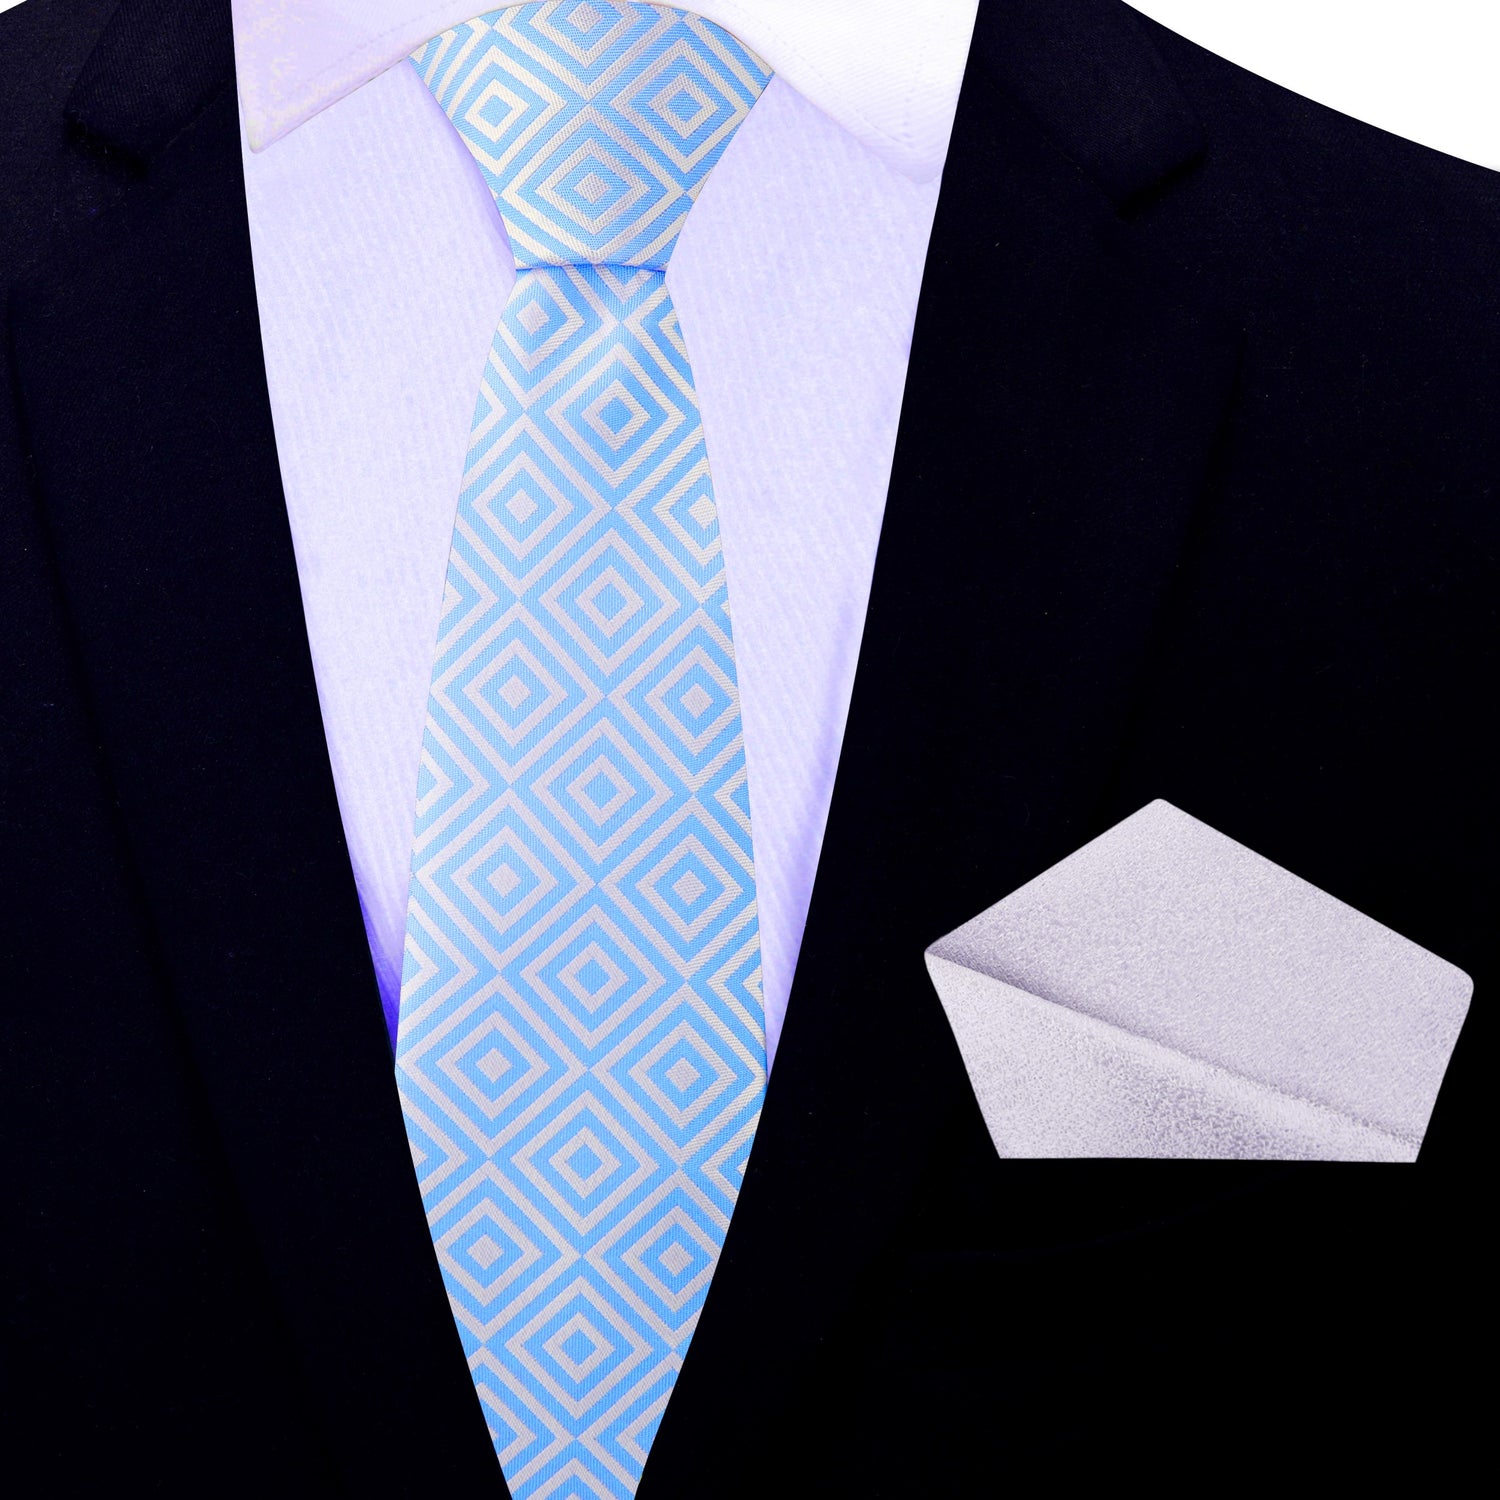 Thin Tie: White, Light Blue Geometric Tie and Shimmer Silver Pocket Square